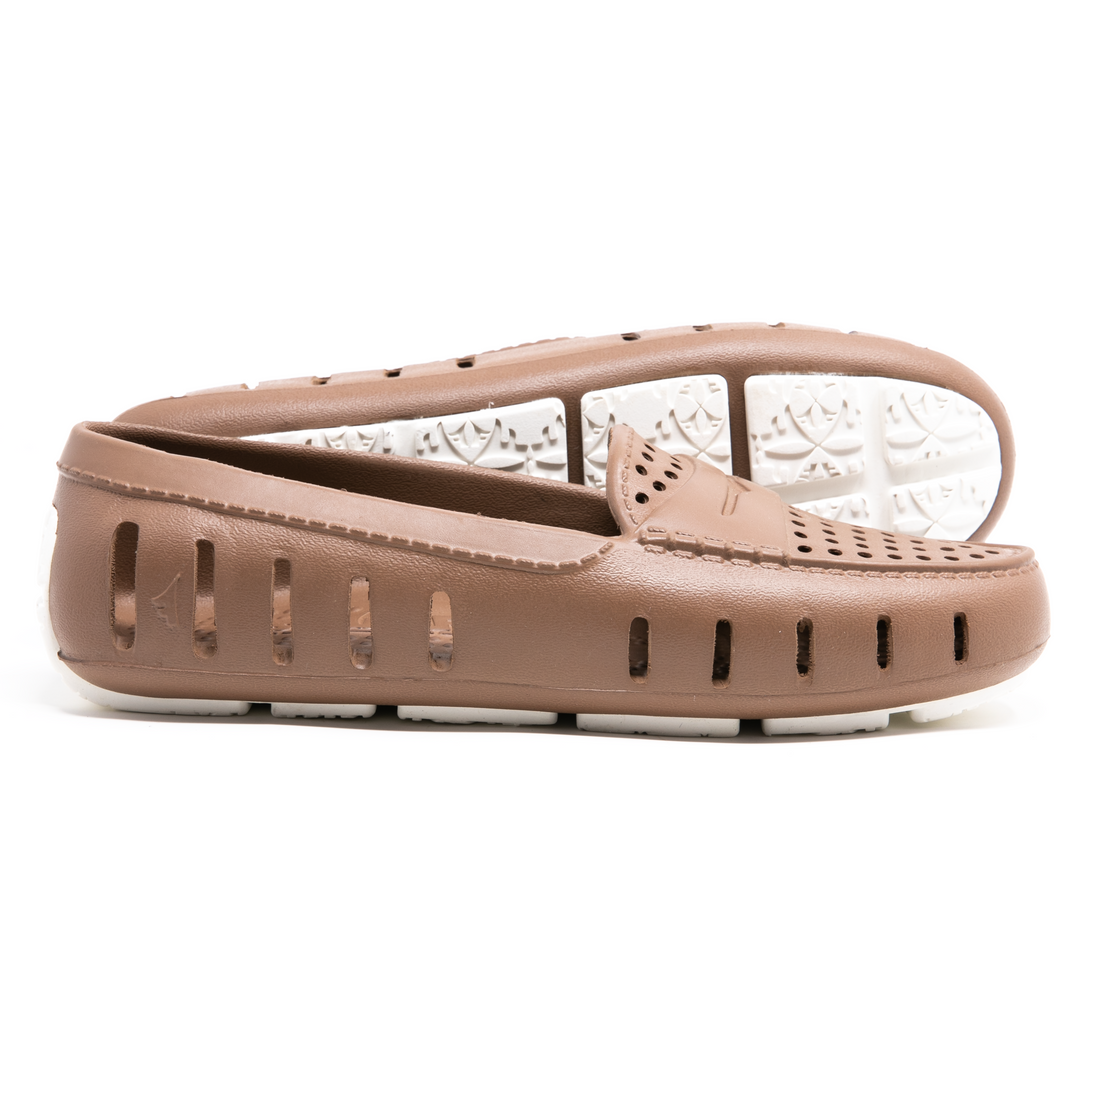 DRIFTWOOD BROWN/COCONUT - WOMENS